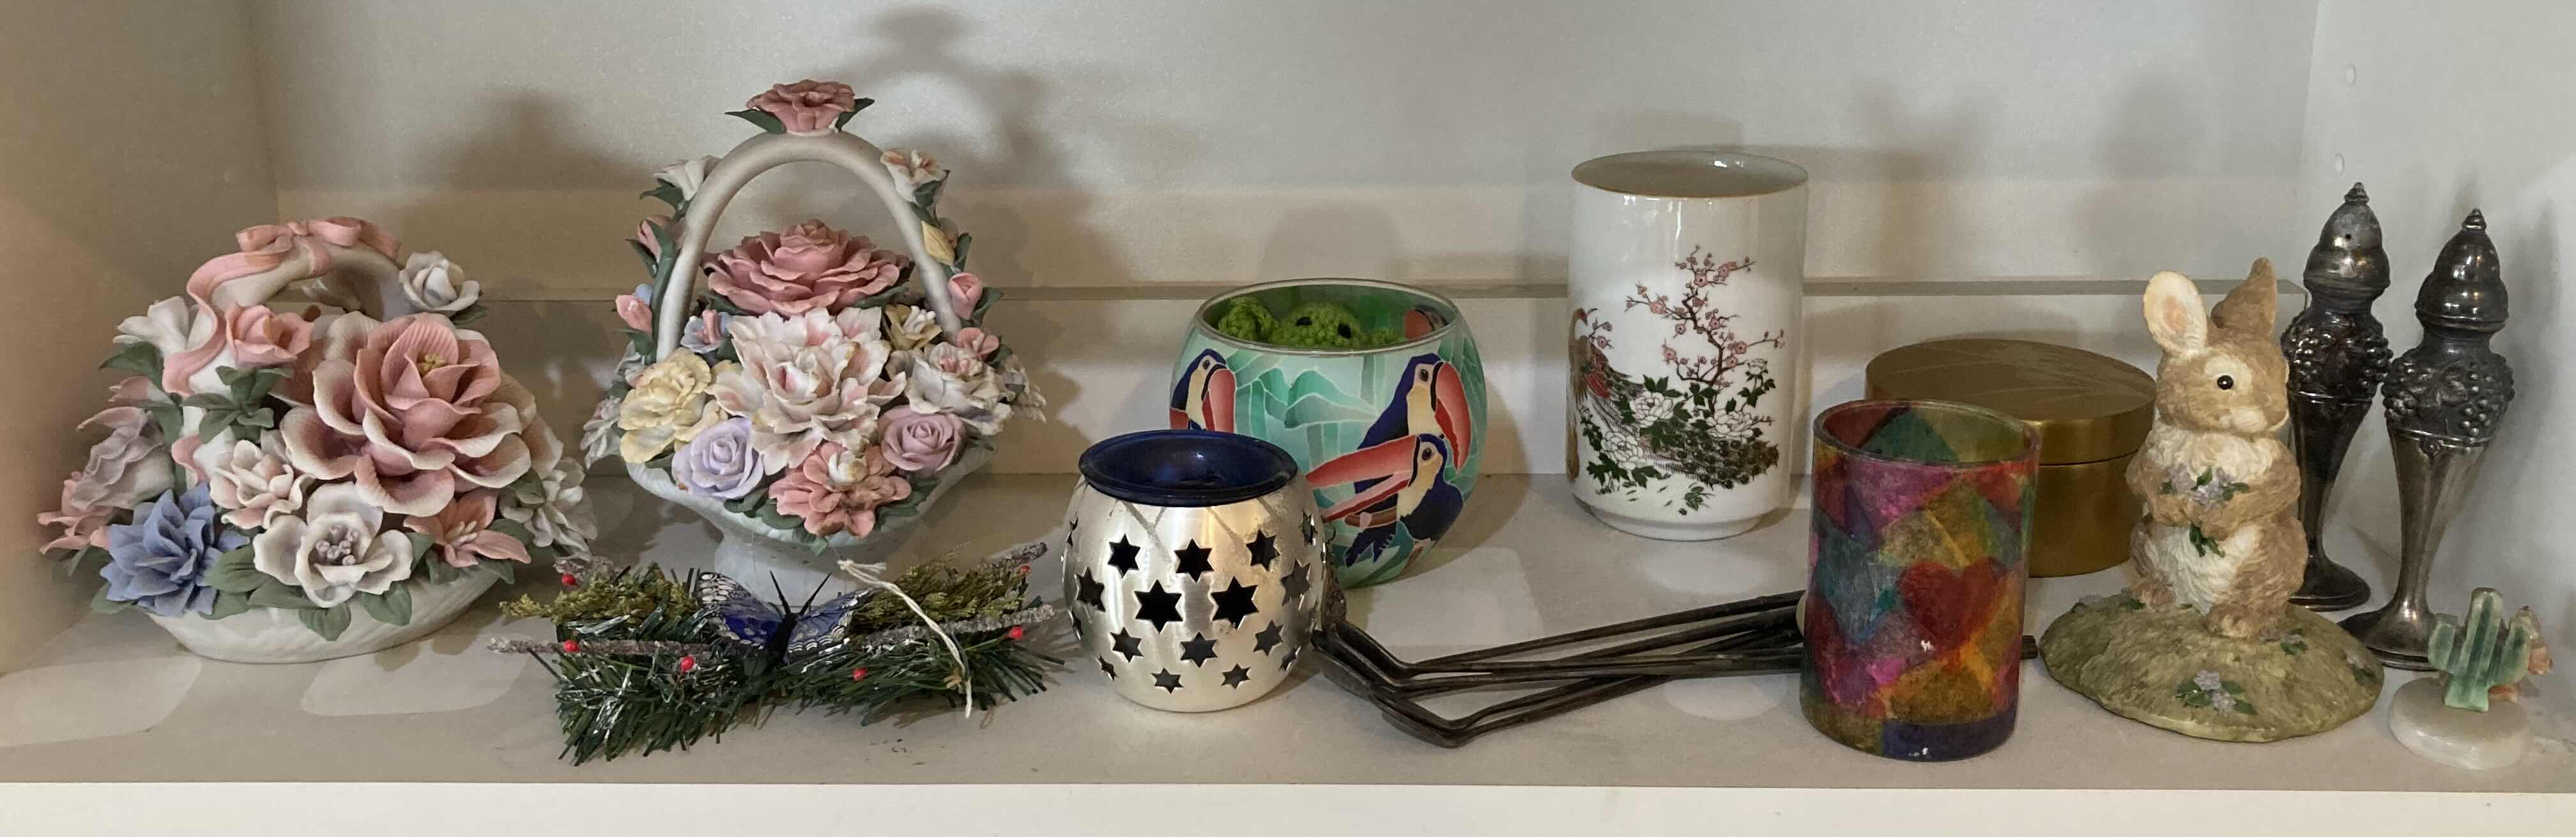 Photo 1 of CONTENTS OF SHELF- FLORAL DECOR, JARS & TABLE TOP DECOR